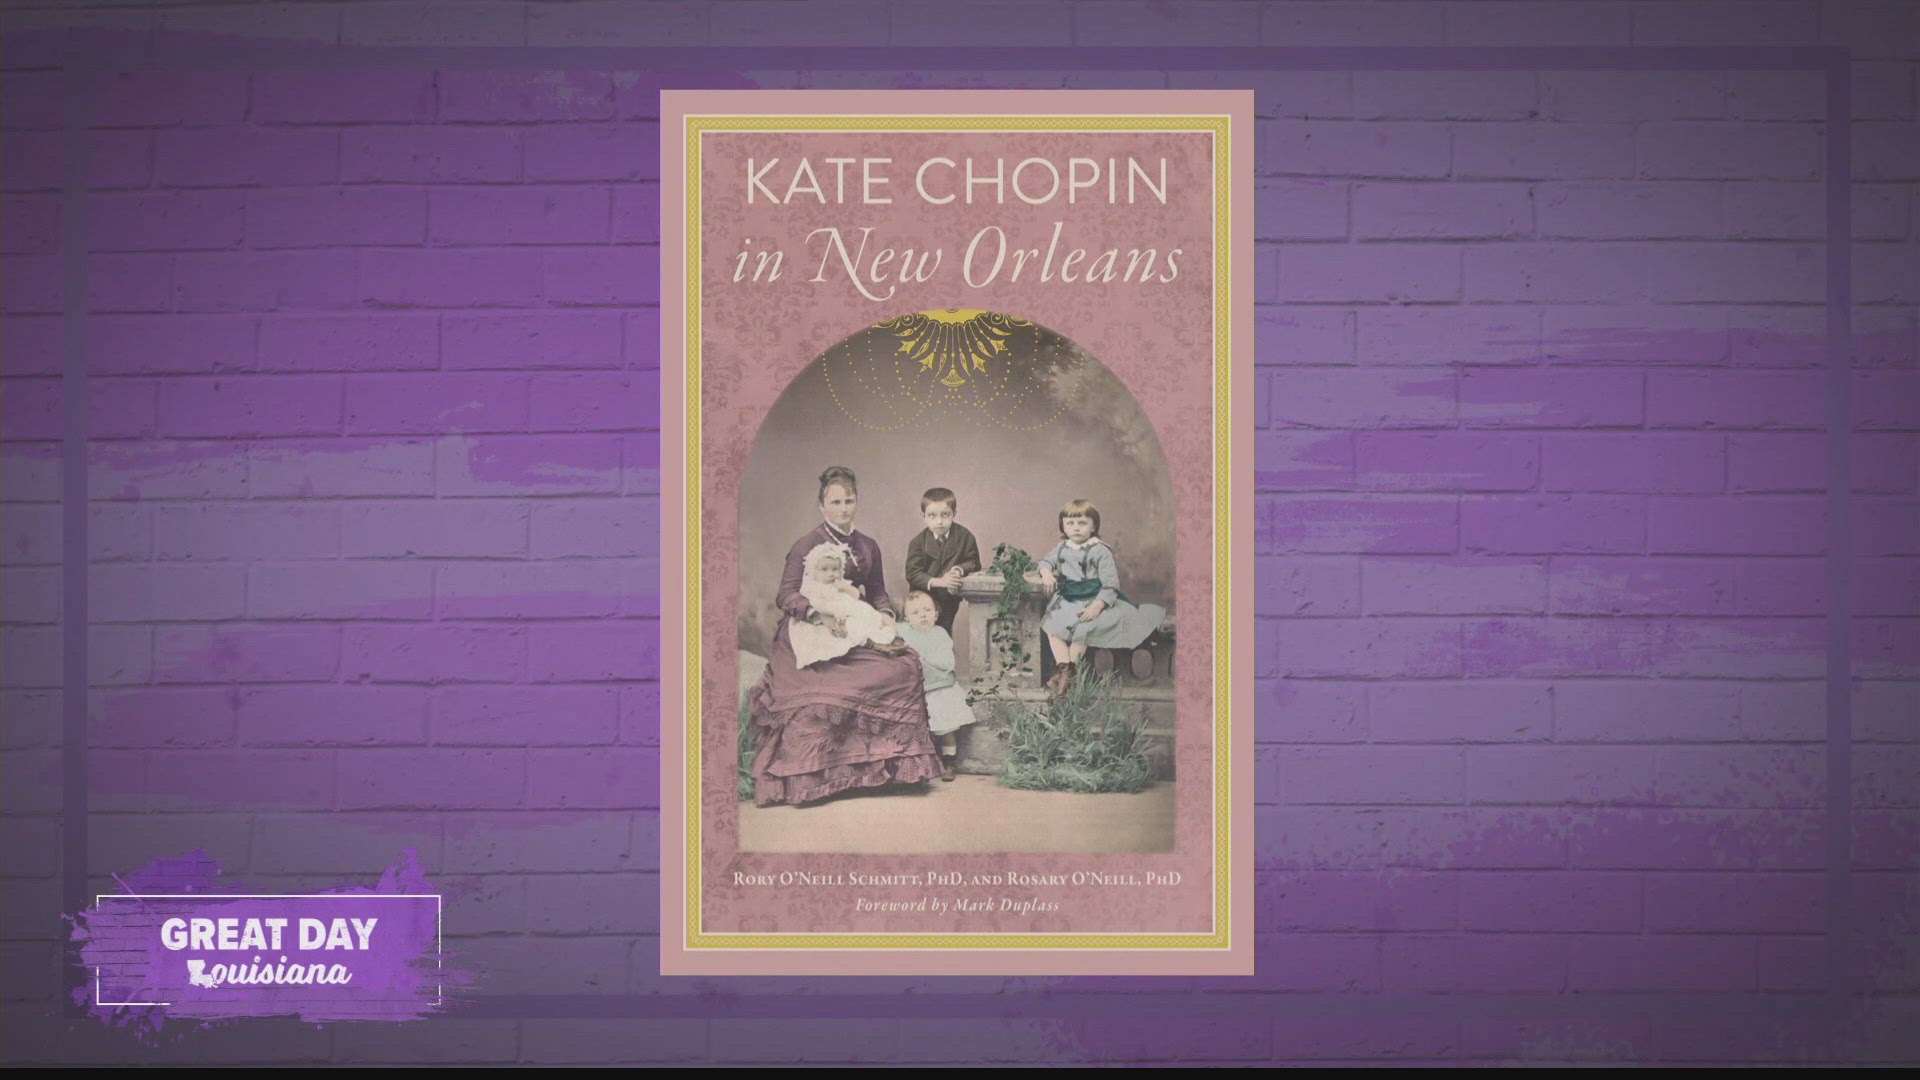 The authors of "Kate Chopin In New Orleans" shared details about their new book inspired by a famous Louisiana author.